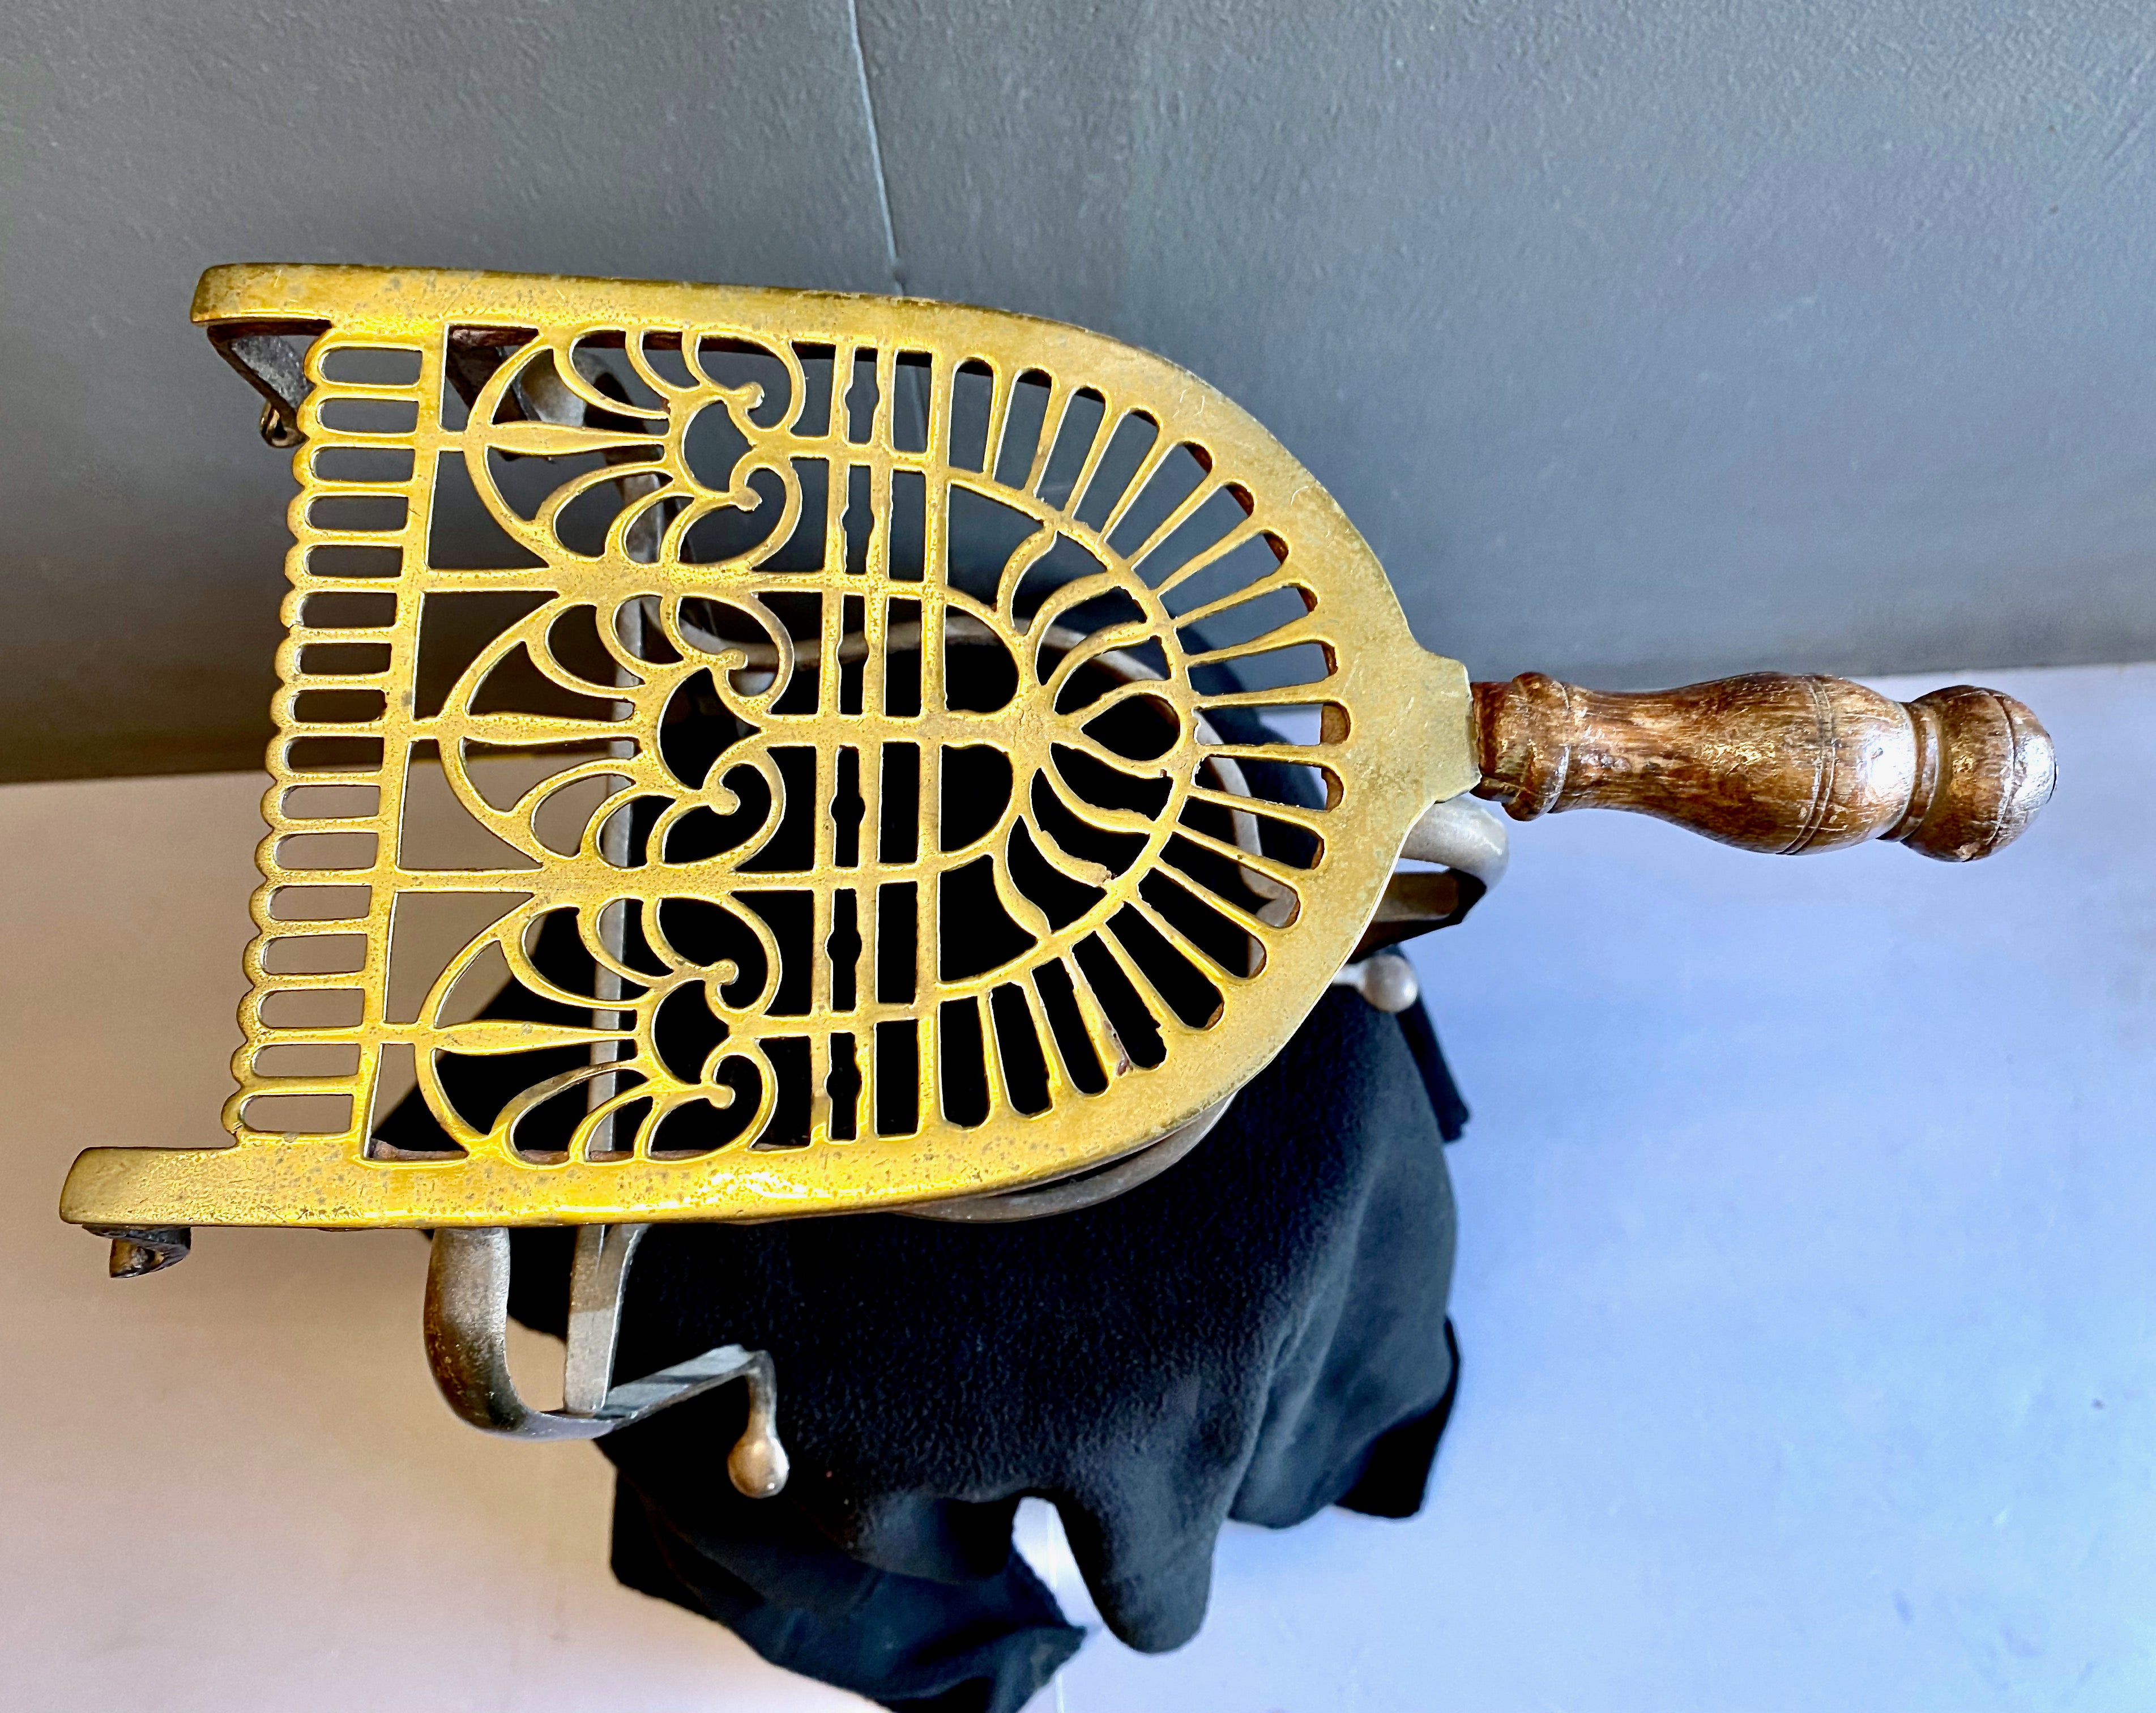 This is a good example of an 18th century pierced brass and wrought iron fireplace trivet. The tall profile of the trivet gives it a delicate presence and makes it highly decorative. All 18th century homes were equipped with trivets as they were